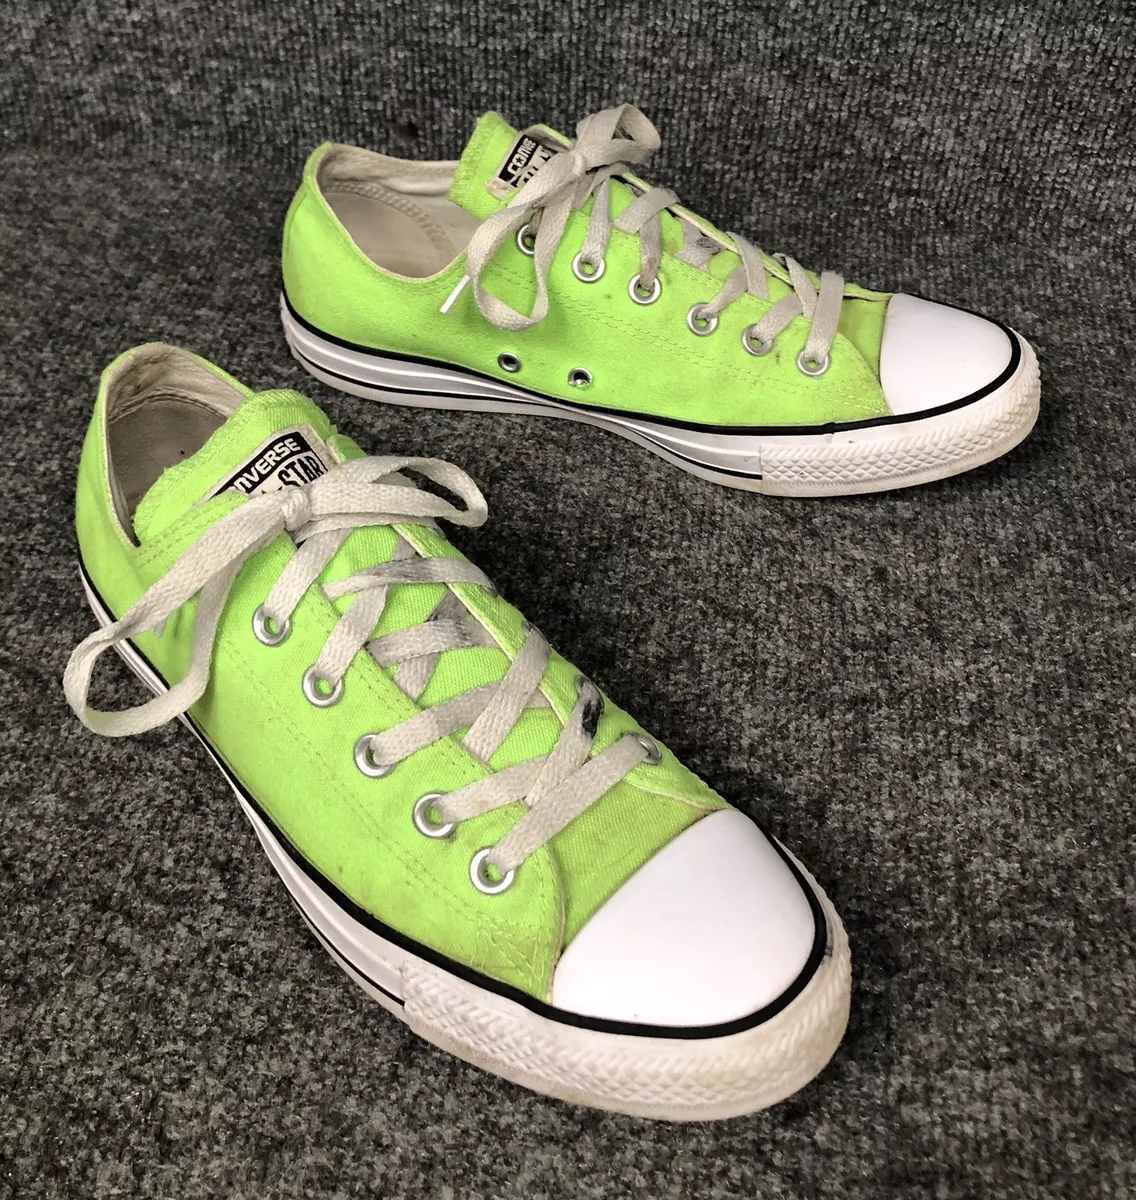 Converse All Star Low Tops Lime Green Sneakers Shoes 7 Womens 9 In EUC | eBay